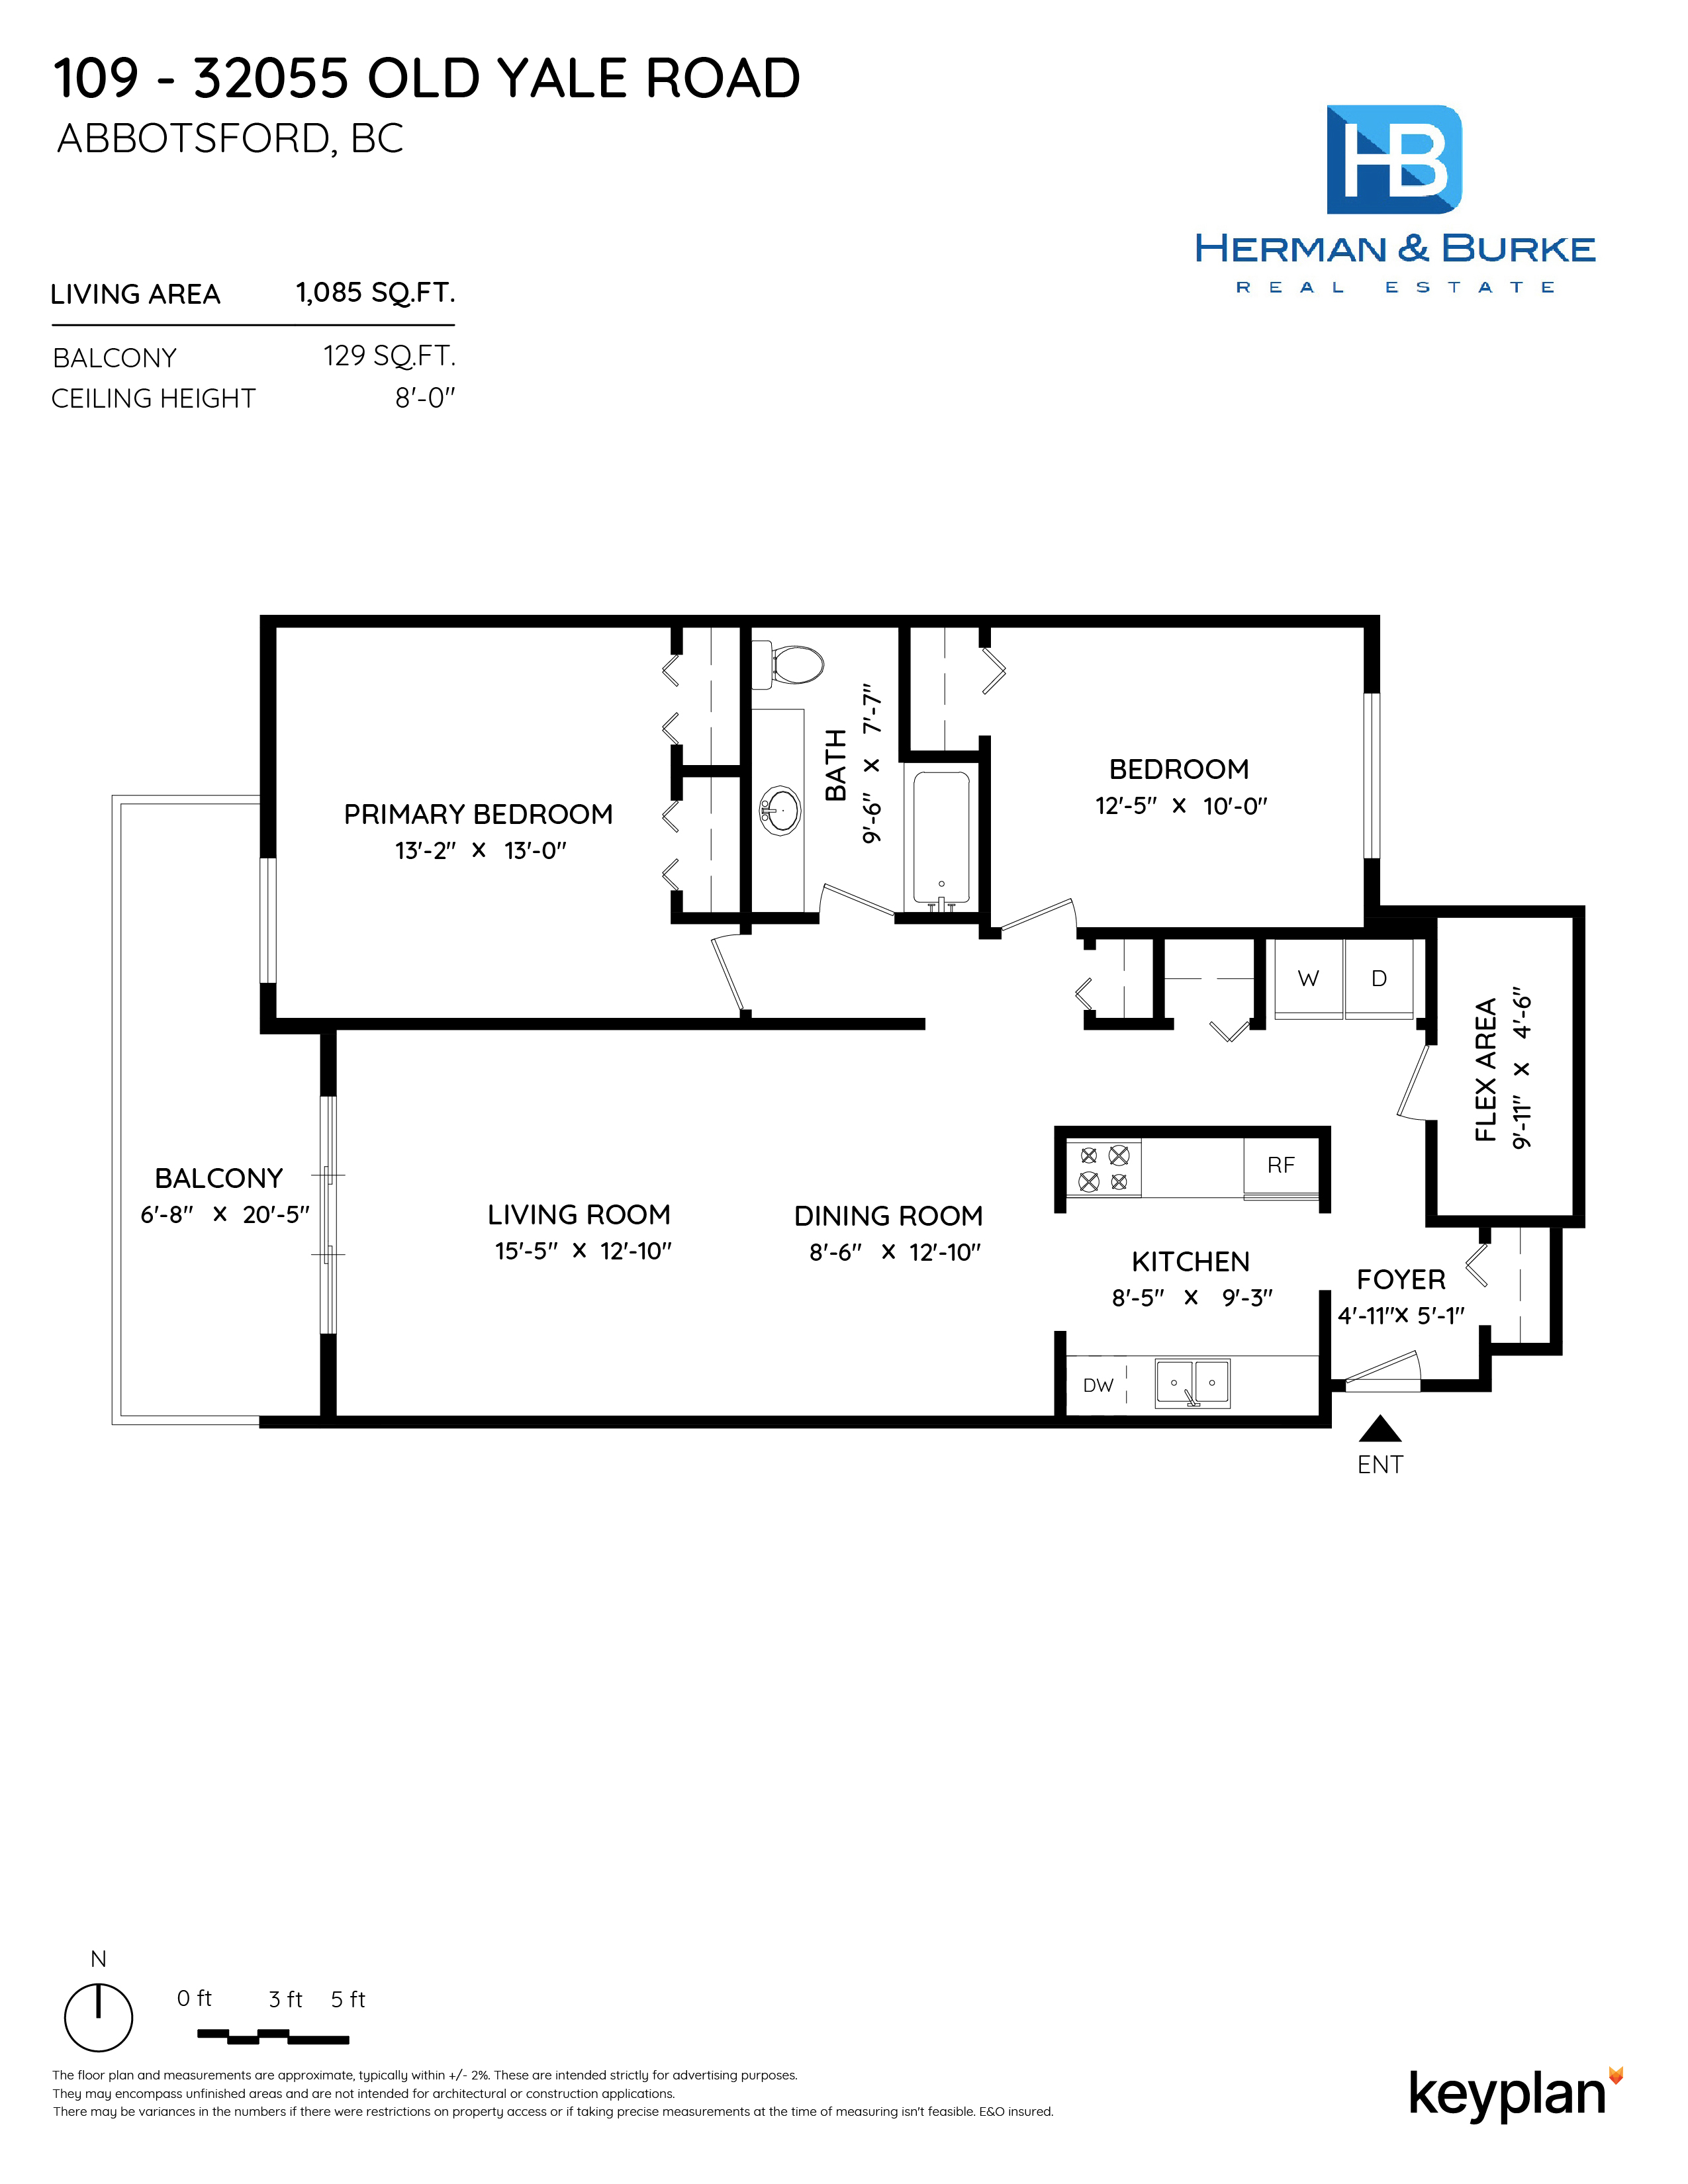 Collette Burke - Unit 109 - 32055 Old Yale Road, Abbotsford, BC, Canada | Floor Plan 1